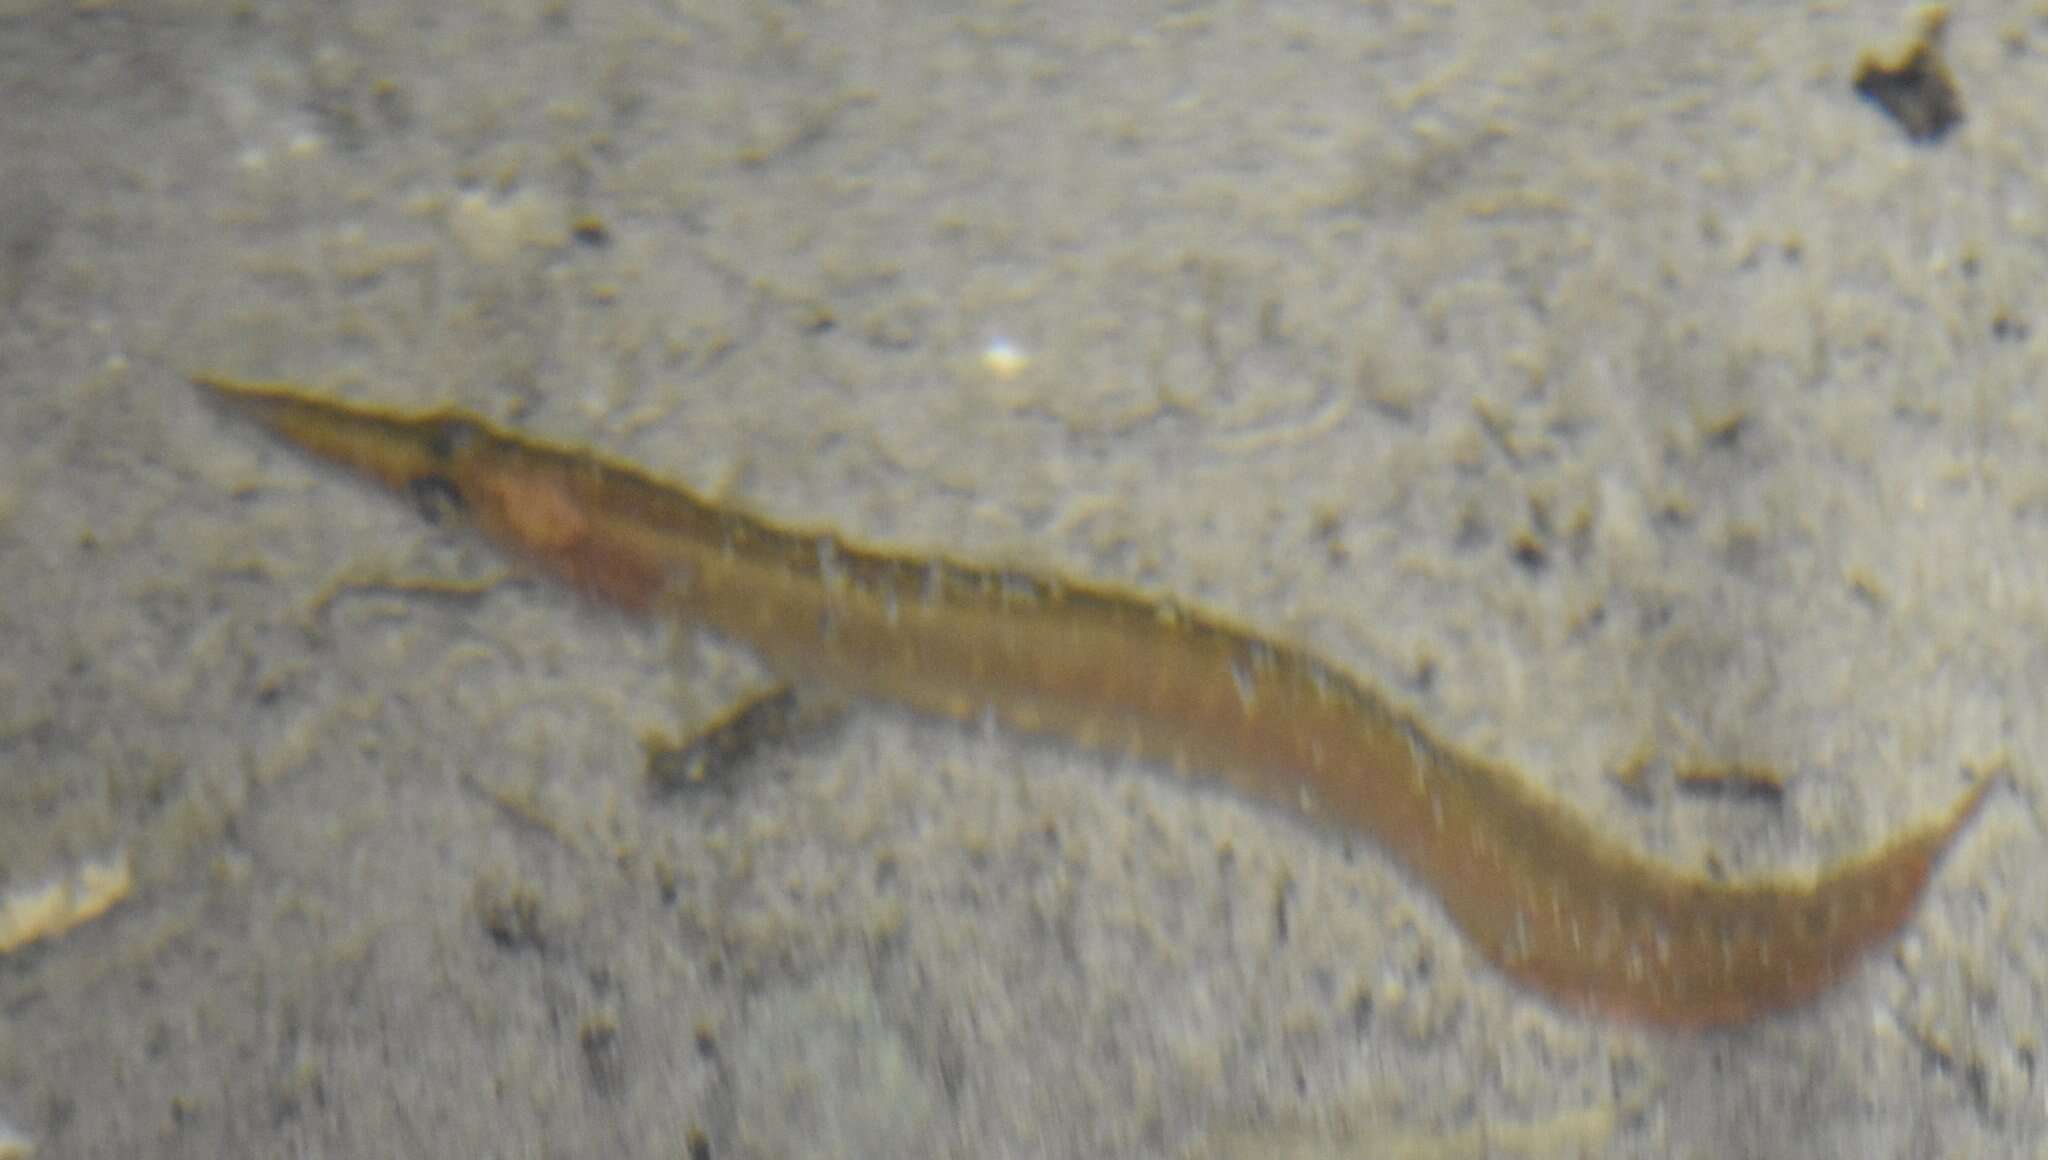 Image of Spotfin Spiny Eel